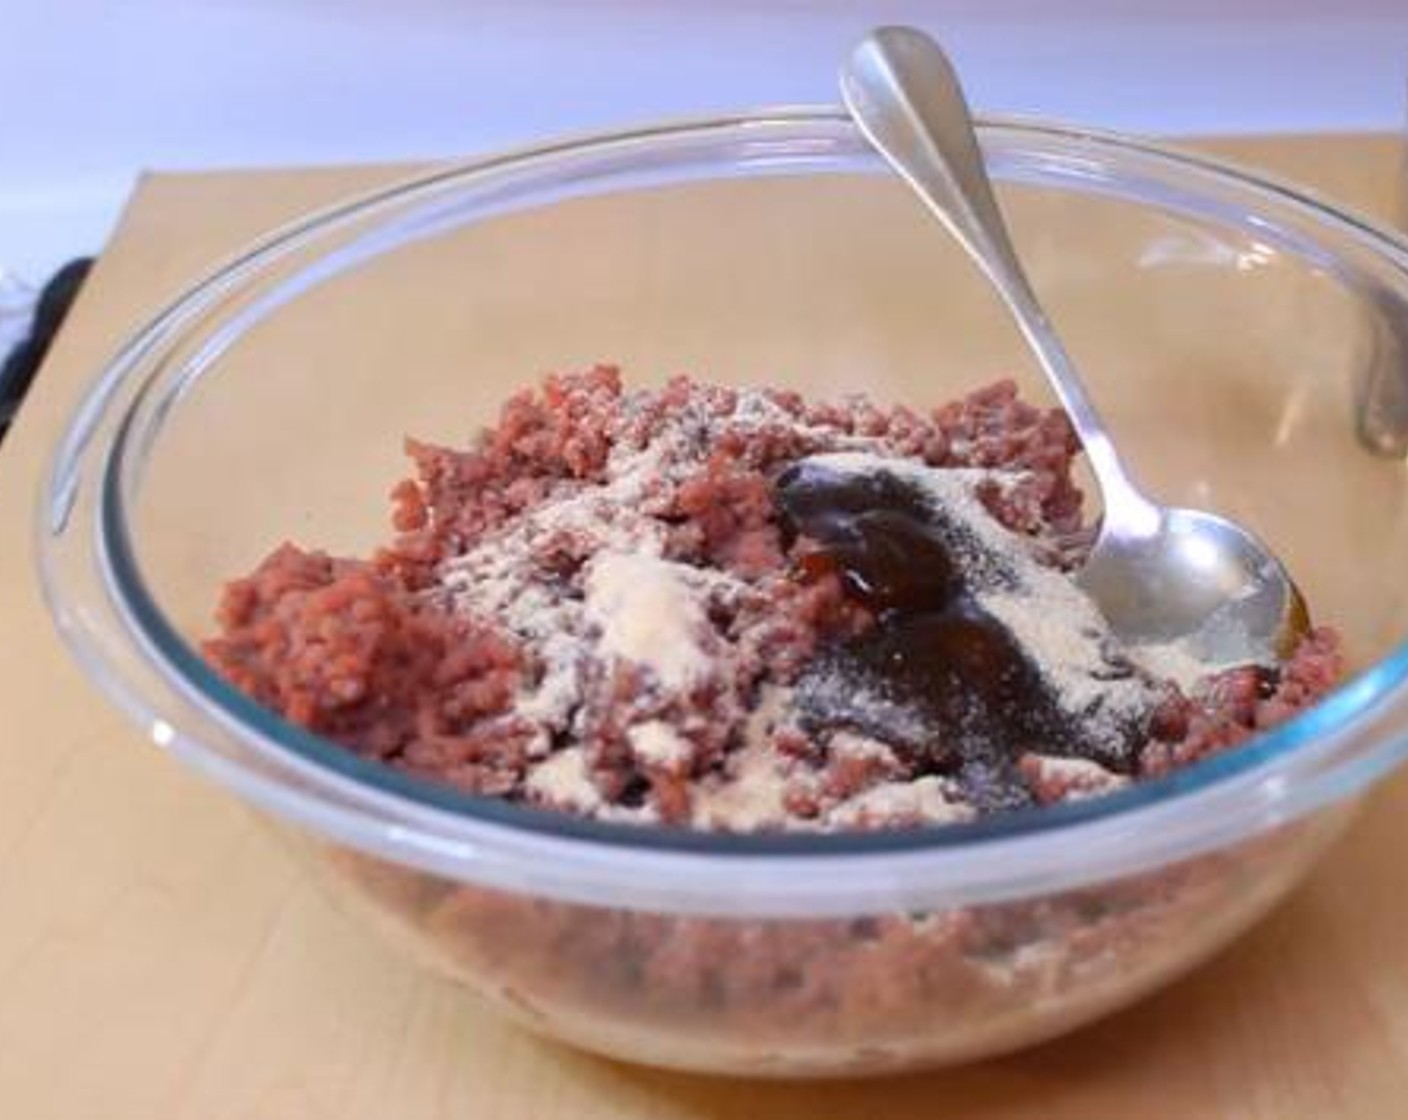 step 1 Using your hand, mix together the Ground Beef (8 oz), Barbecue Sauce (3 Tbsp), McCormick® Garlic Powder (1/2 Tbsp), Salt (to taste), and Ground Black Pepper (to taste).